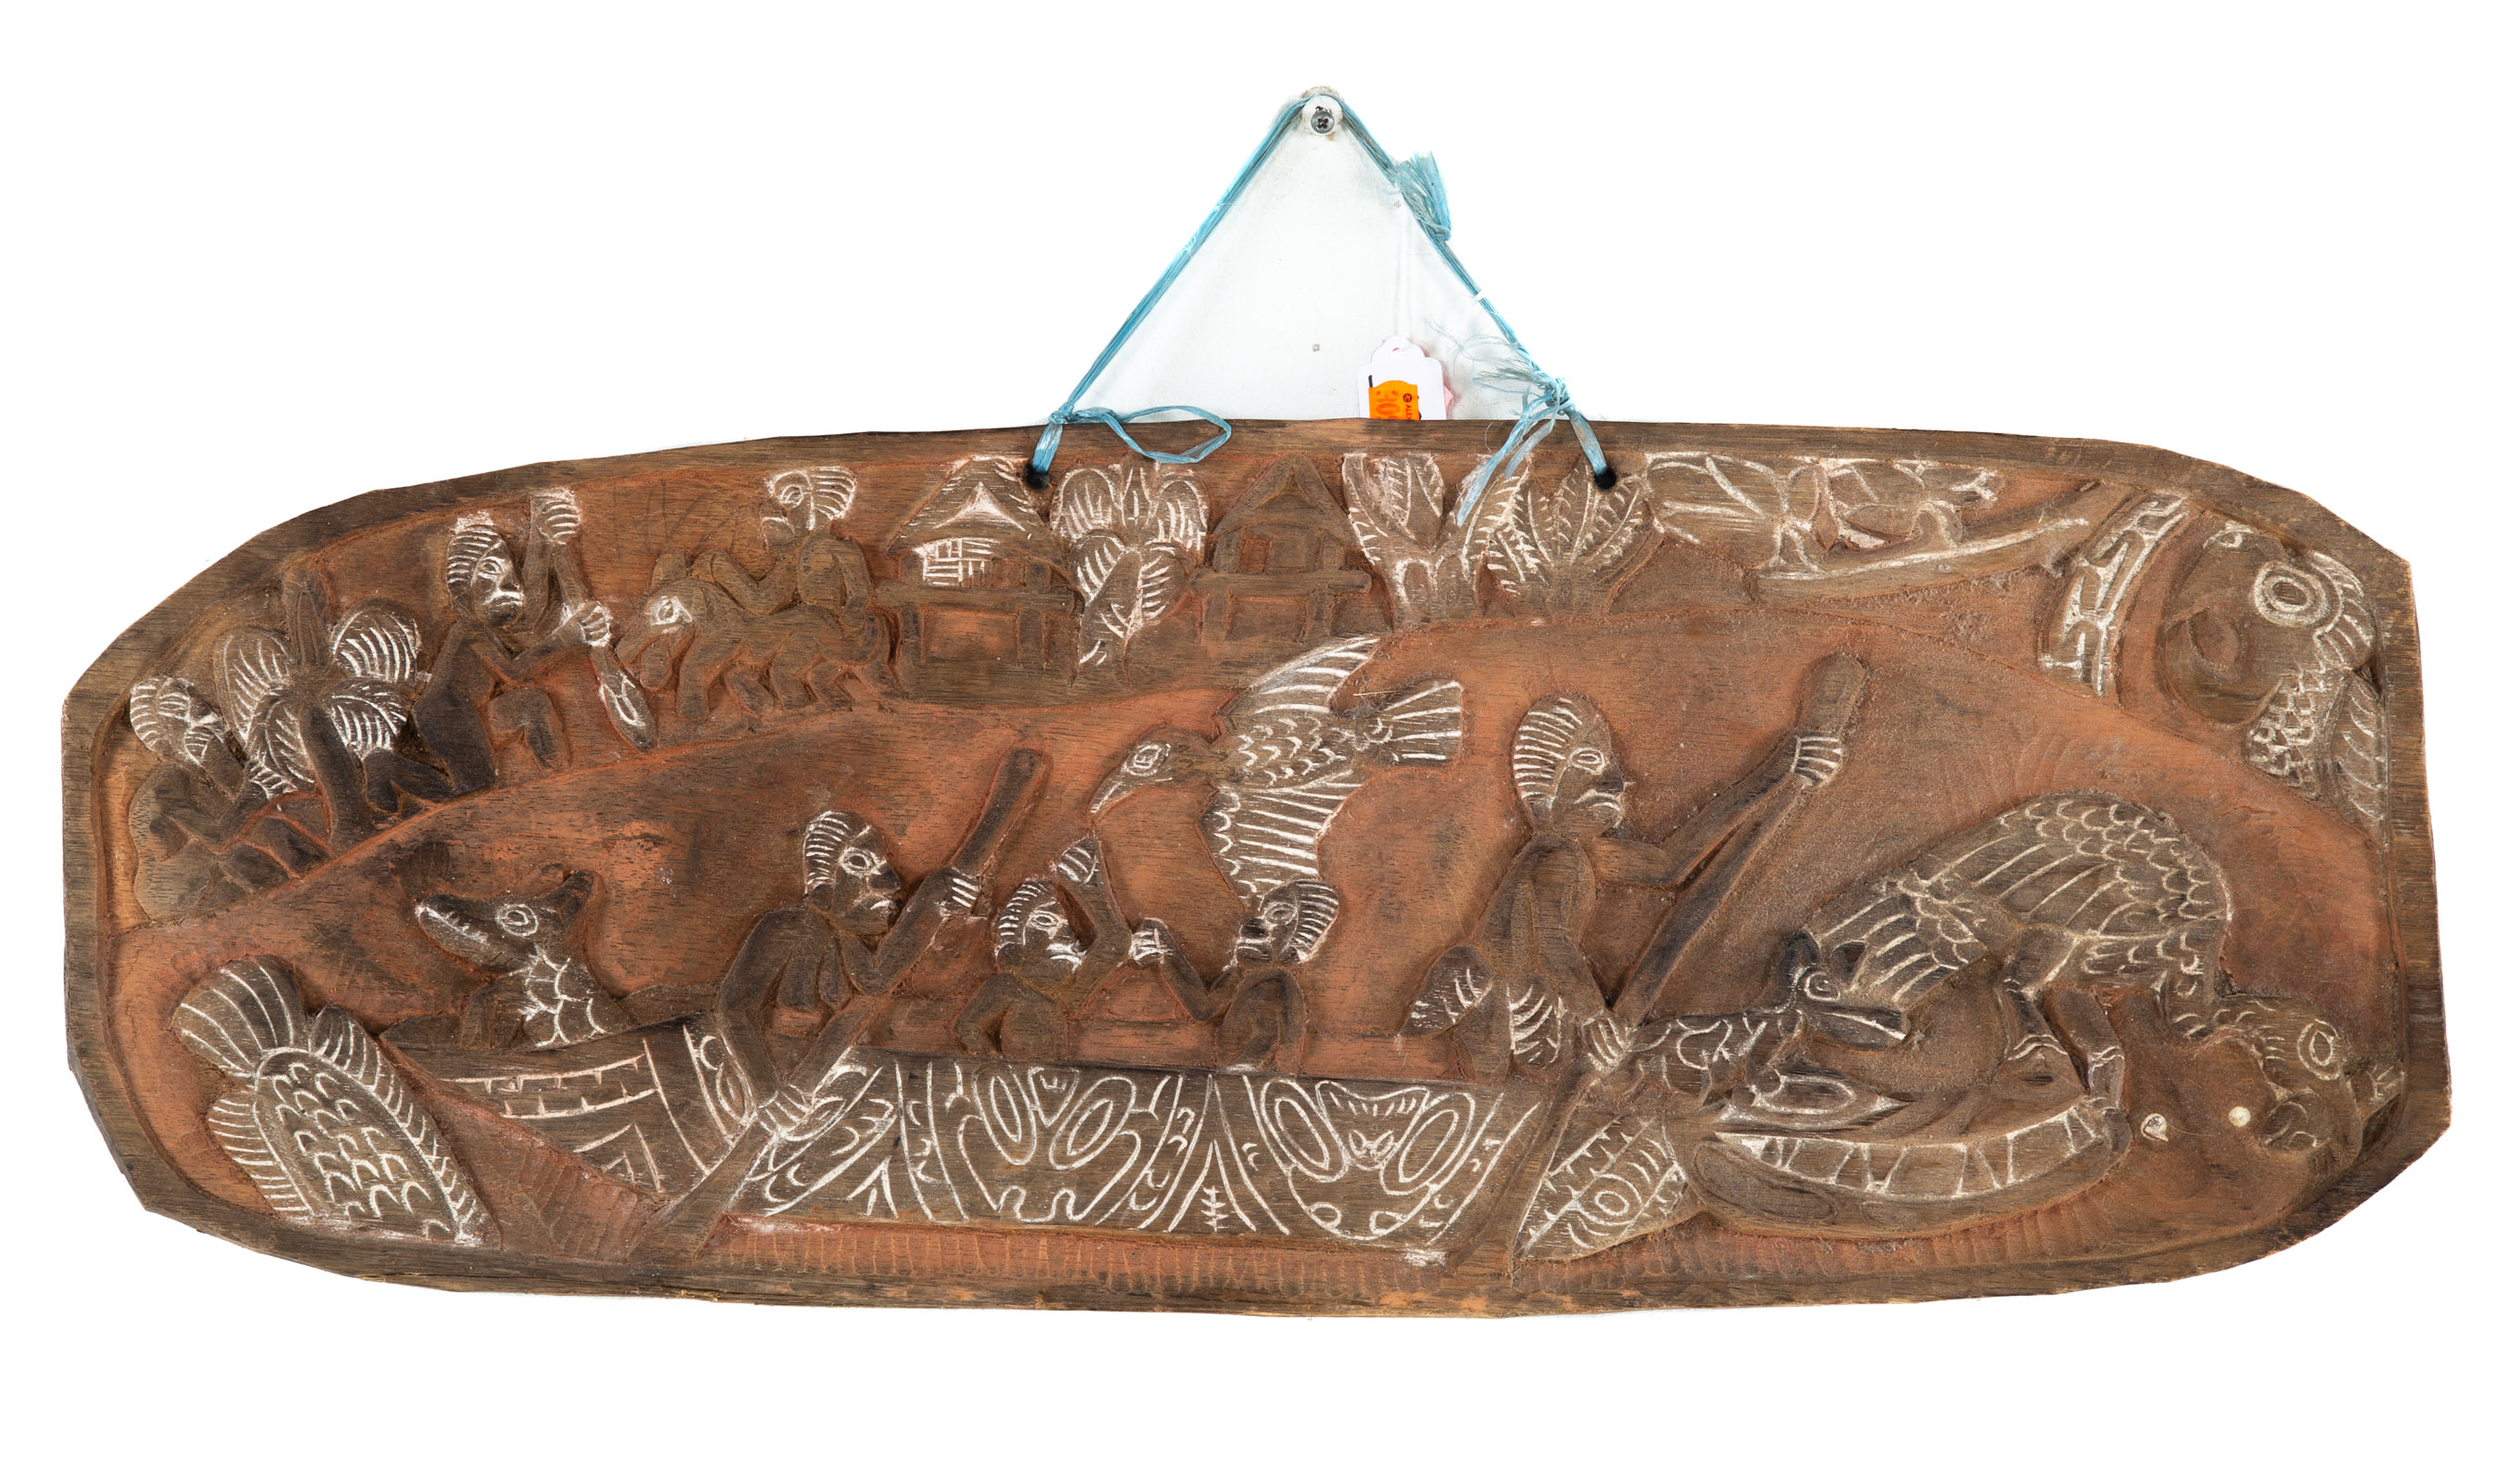 NEW GUINEA CARVED WOODEN STORYBOARD